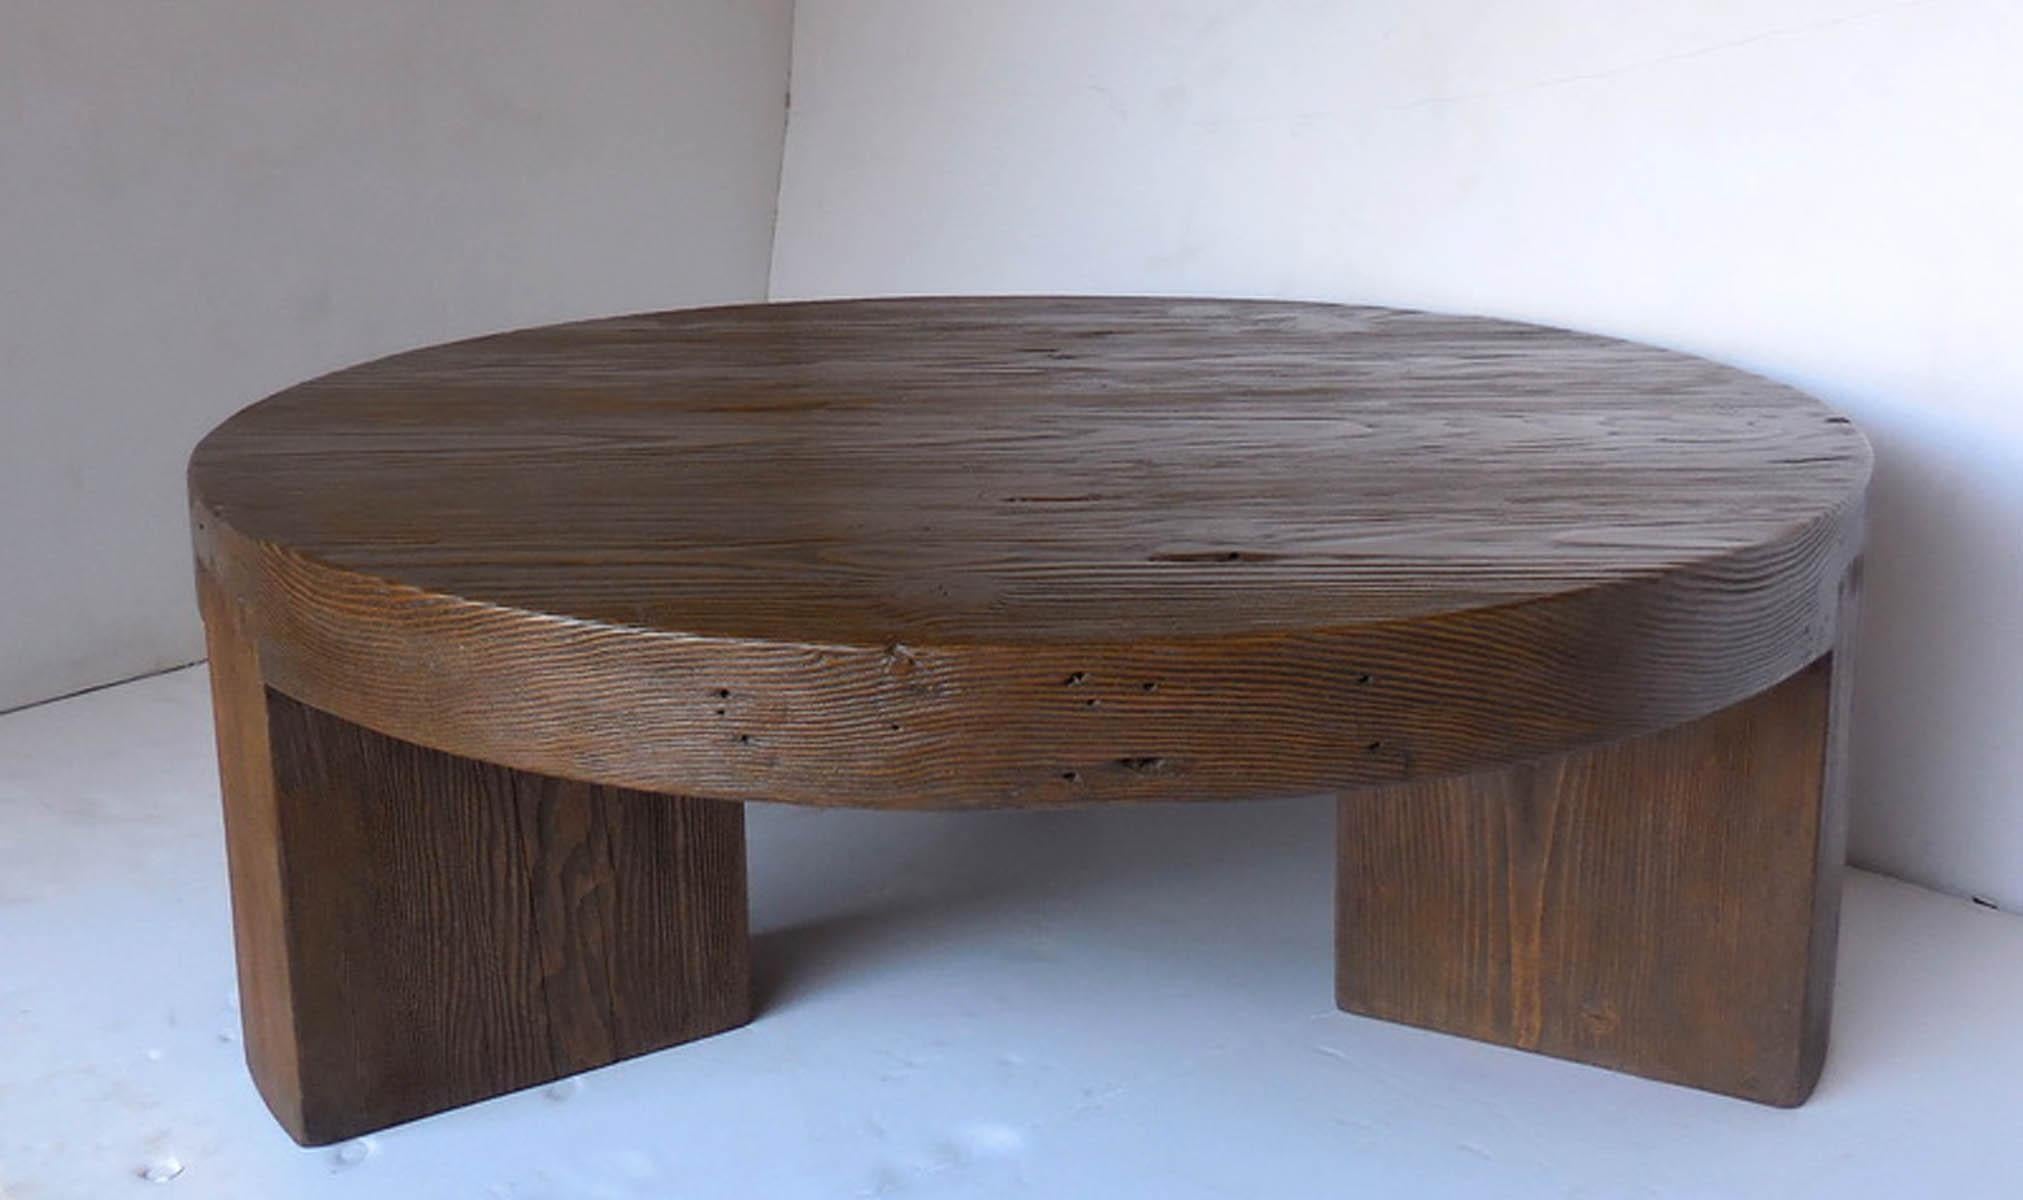 Custom Douglas fir coffee table with 3.5 inch thick top and three chunky legs.  Please see photos for finish options. 

Made in Los Angeles by Dos Gallos Studio. CUSTOM PRICES ARE SUBJECT TO CHANGE. PLEASE INQUIRE BEFORE ORDERING. ALL CUSTOM ORDERS